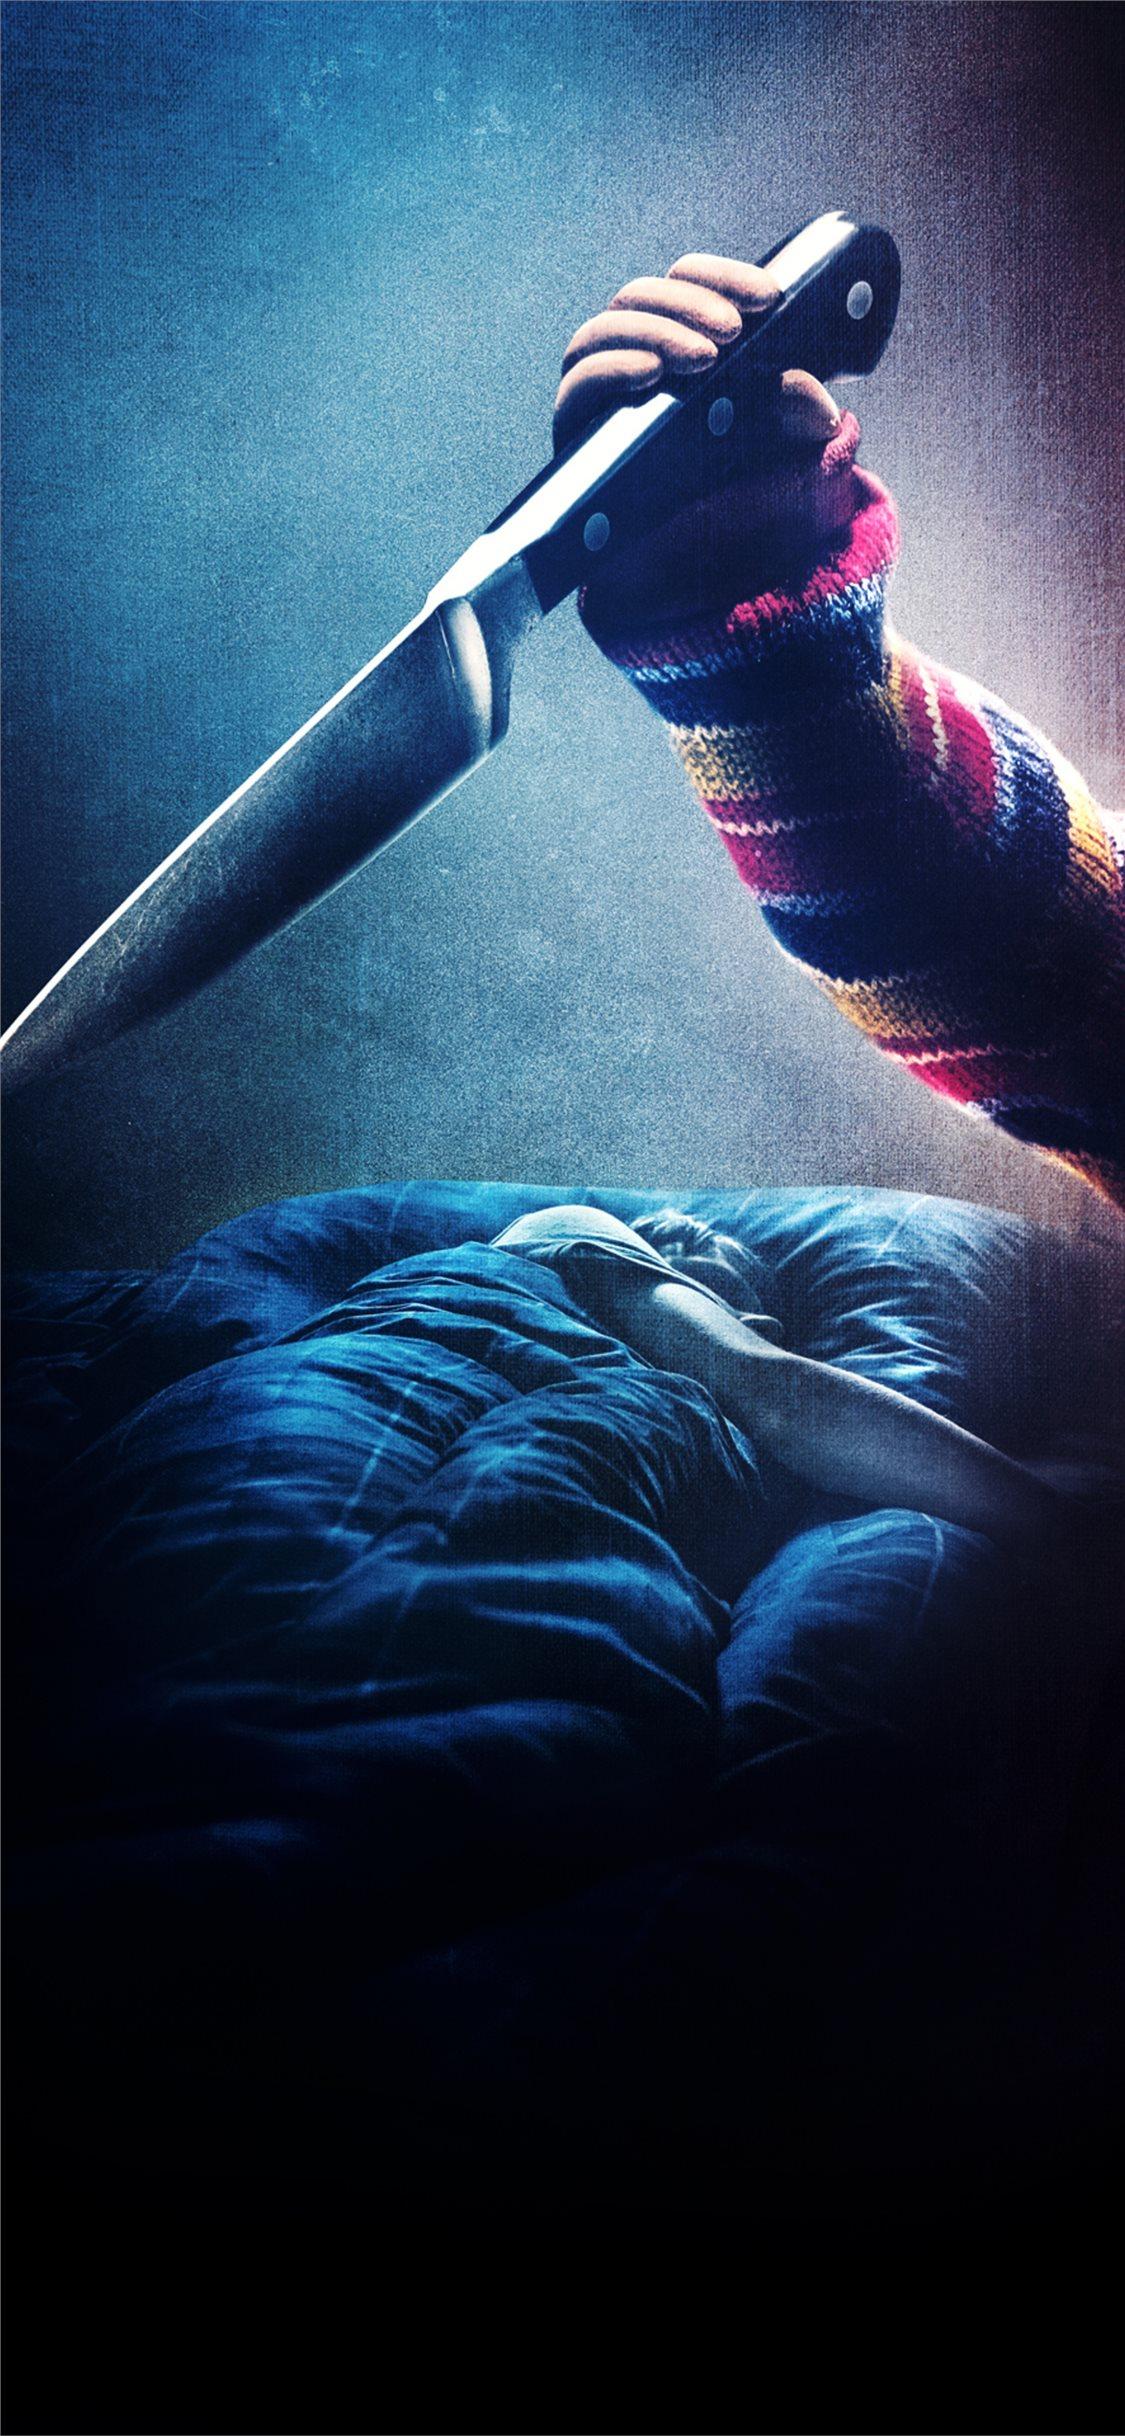 childs play movie 2019 iPhone X Wallpaper Free Download